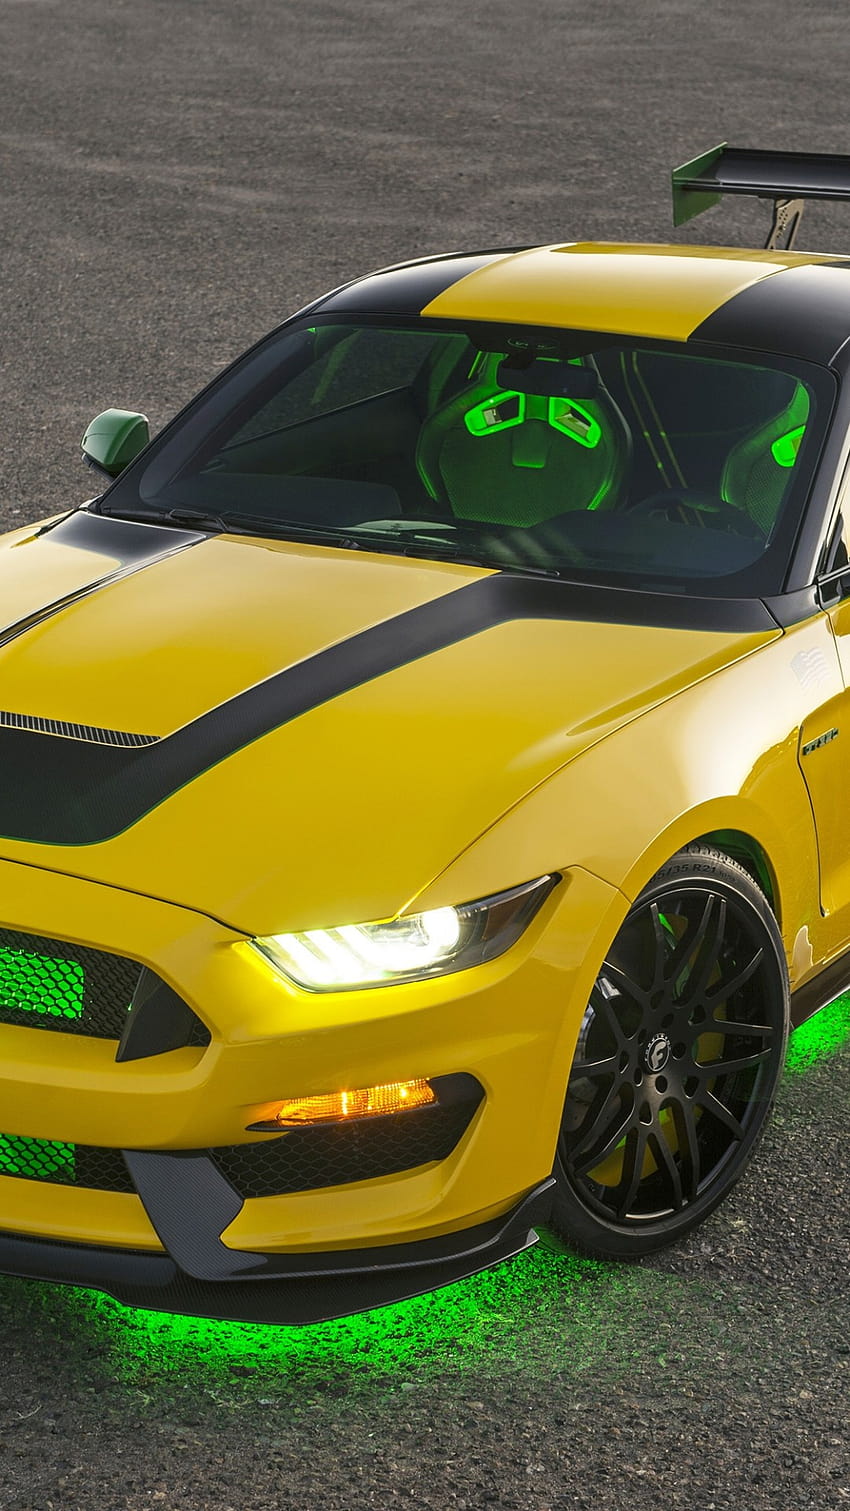 1080x1920 Ford Mustang Shelby Gt500, Yellow, Neon Lights, Cars for iPhone 8, iPhone 7 Plus, iPhone 6+, Sony Xperia Z, HTC One, ネオンムスタング HD電話の壁紙